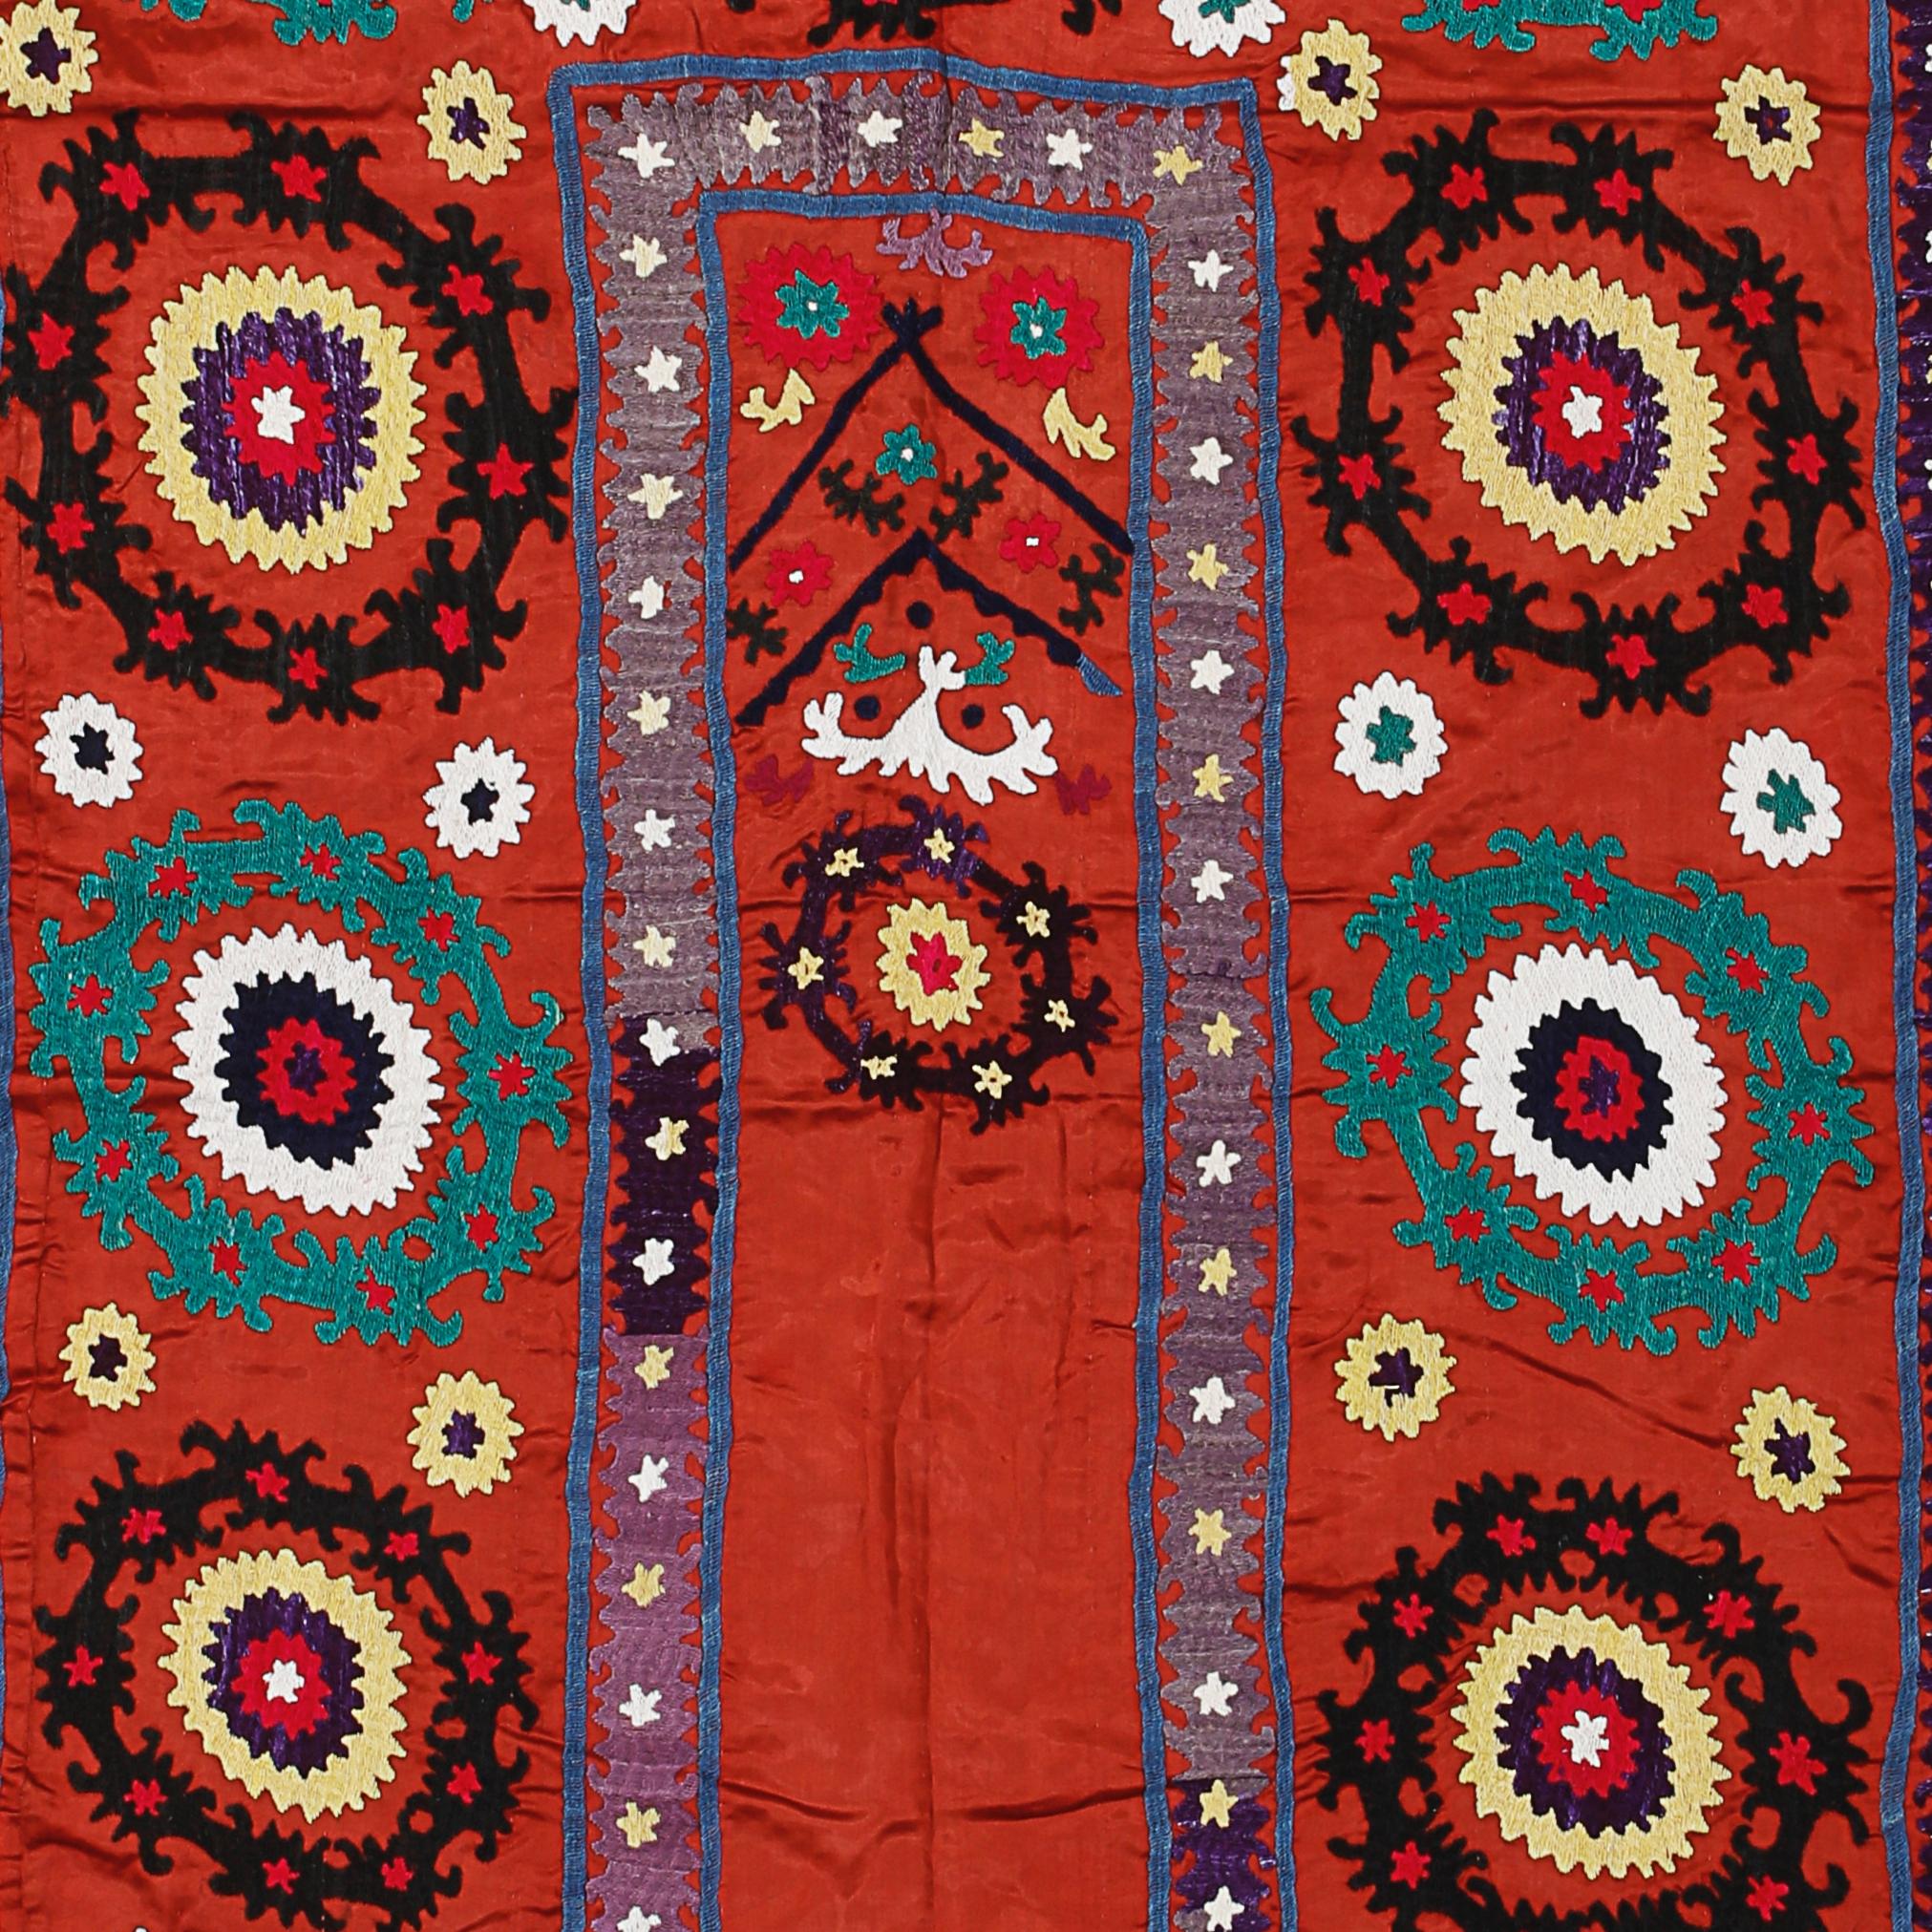 Uzbek 3.2x5.3 Ft Tashkent Suzani Textile Wall Hanging, Red Silk Embroidery Table Cover For Sale